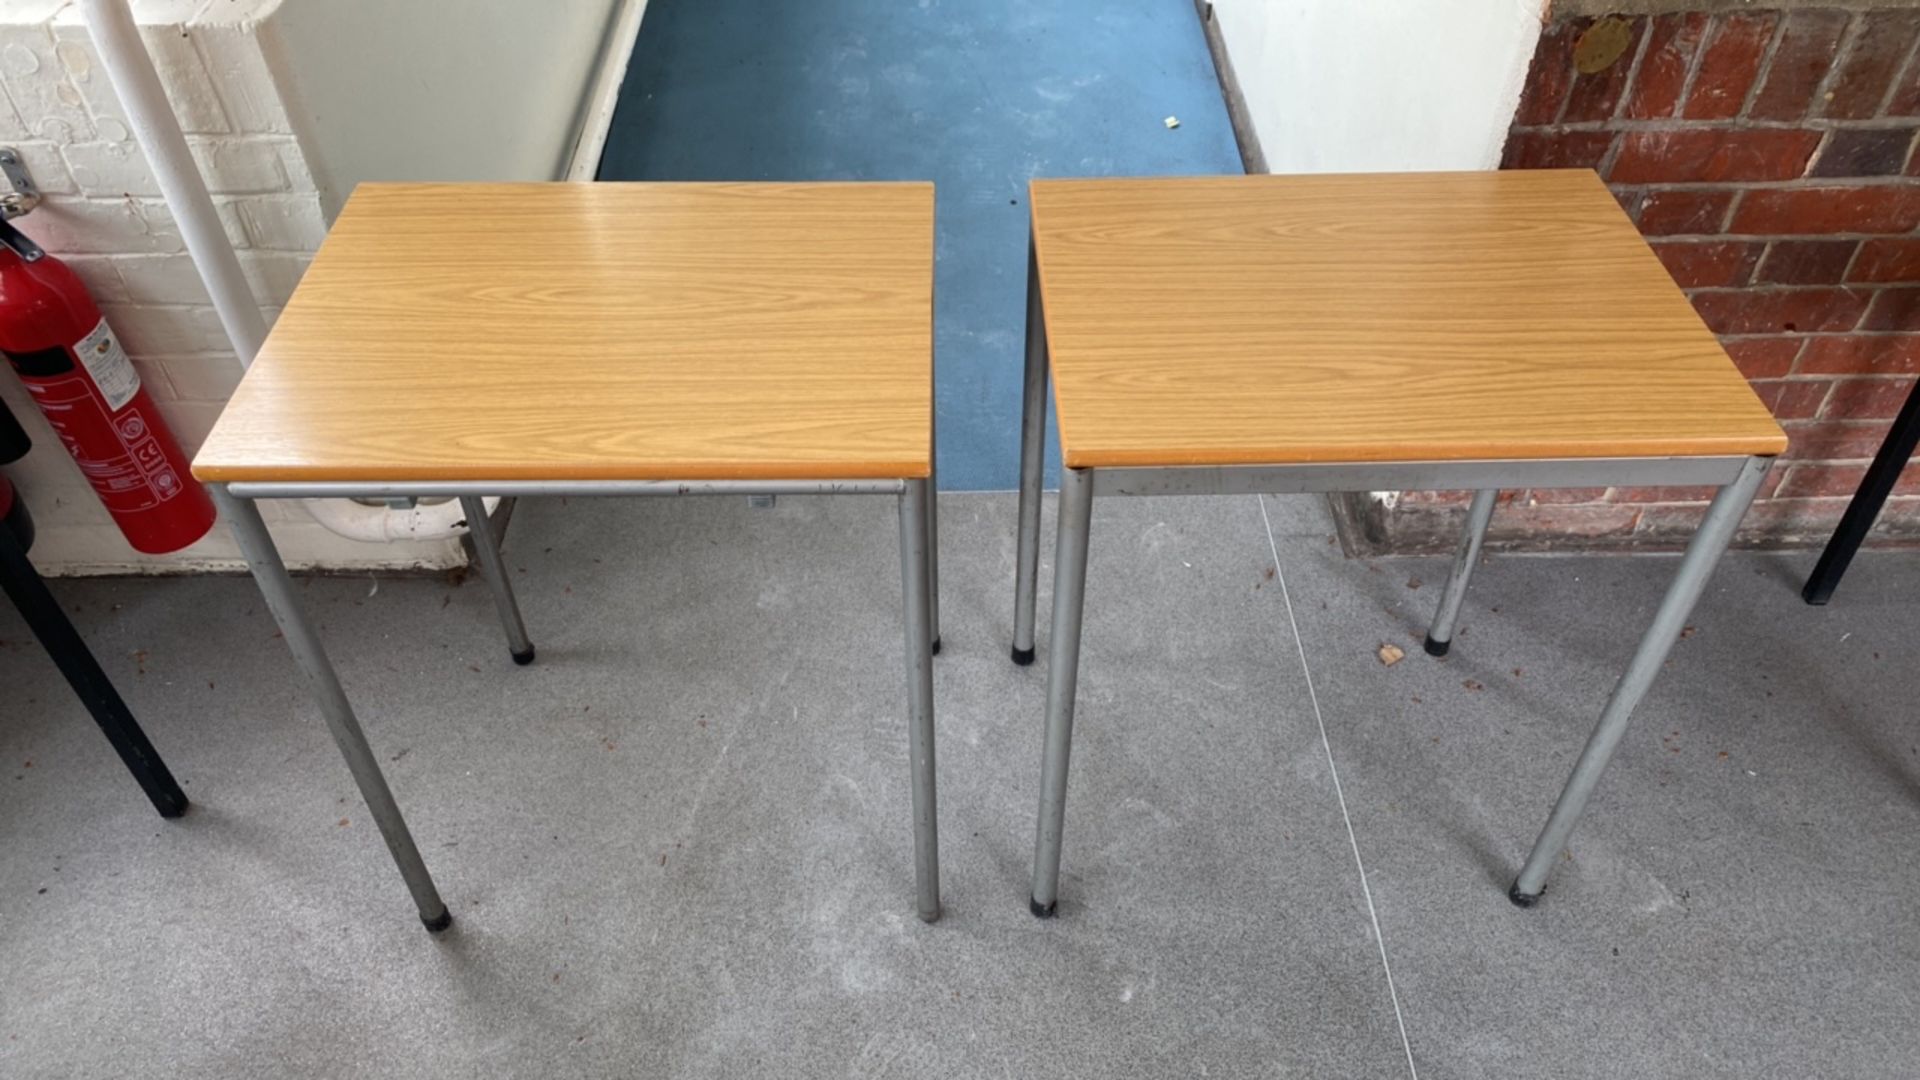 Set of 4 Silver Framed Exam Tables - Image 2 of 6